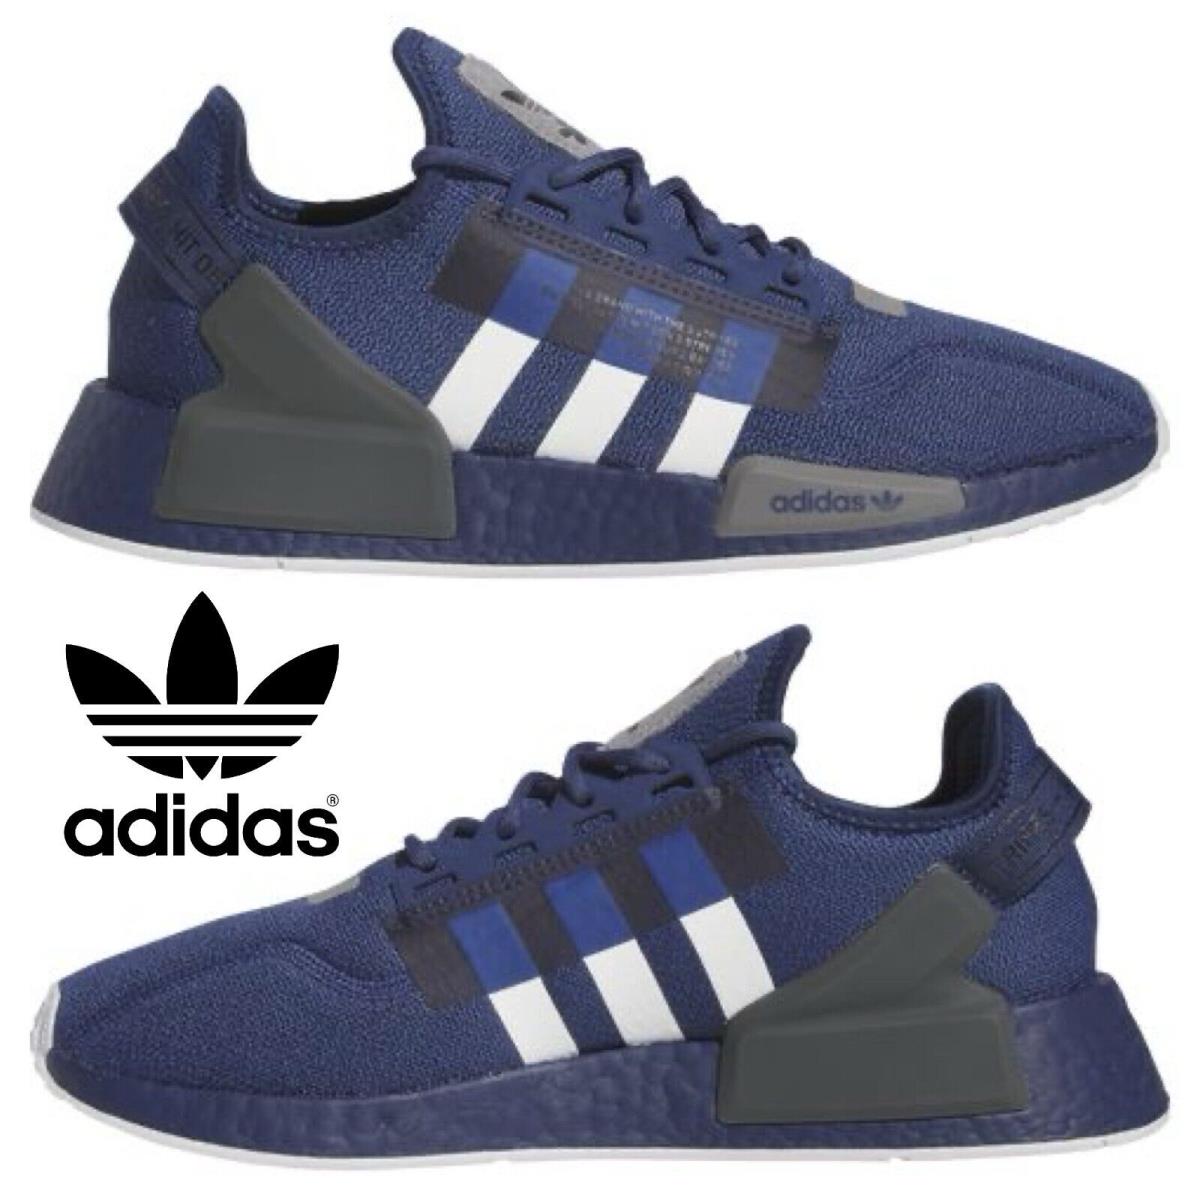 Adidas Originals Nmd R1 V2 Men`s Sneakers Running Shoes Casual Sport Navy Blue